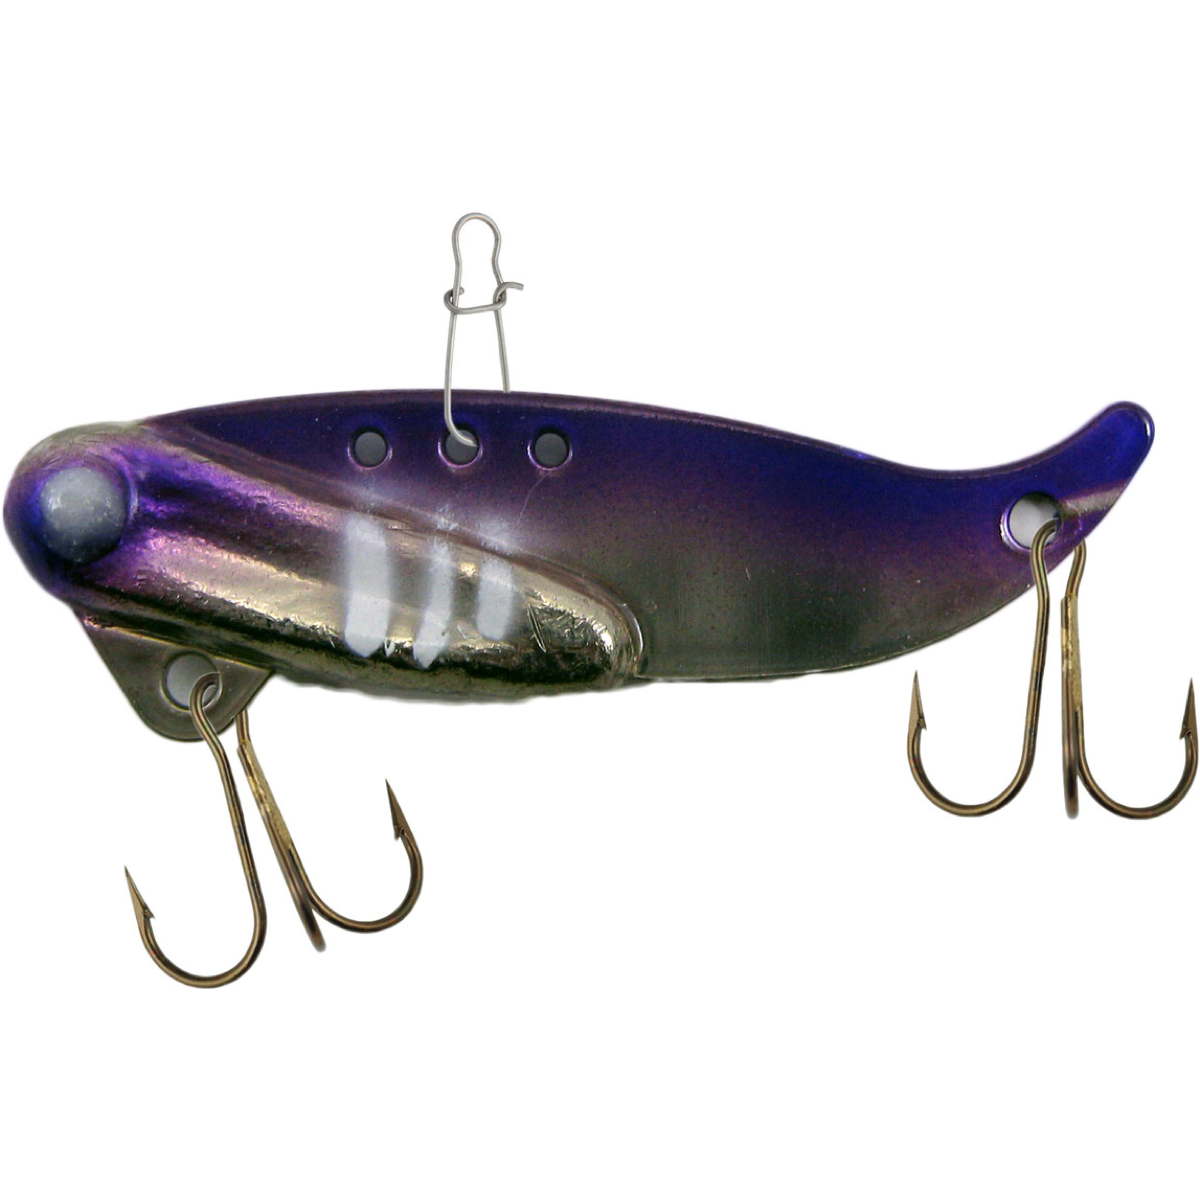 Photo of KMDA VibE Blade Bait for sale at United Tackle Shops.